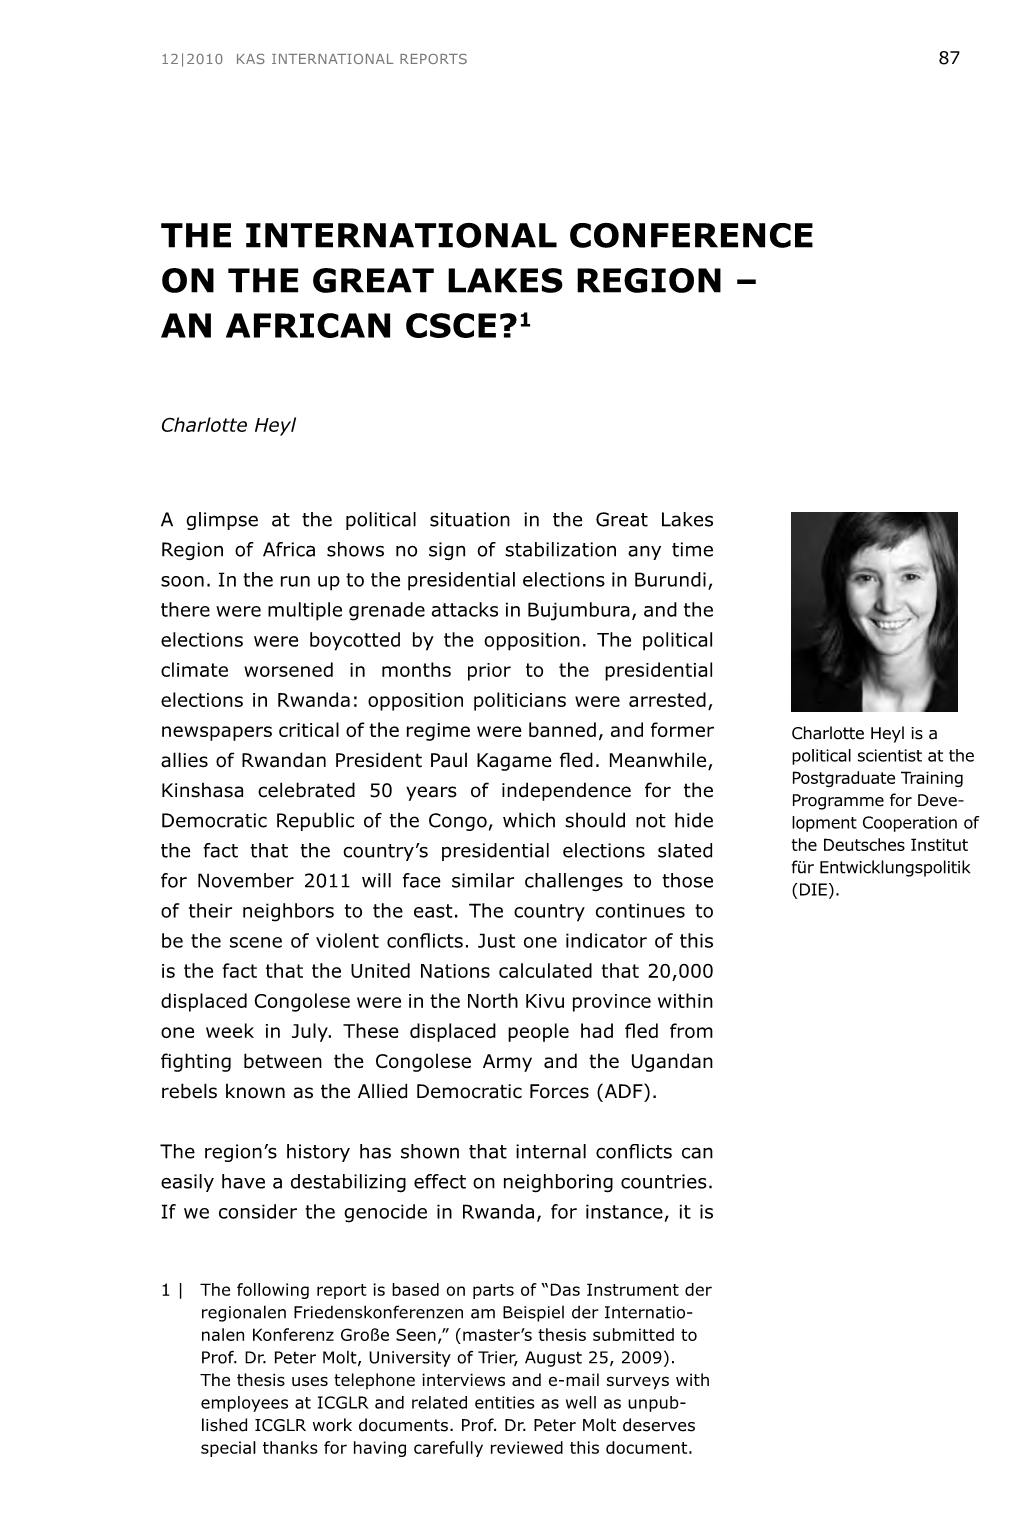 The International Conference on the Great Lakes Region – an African Csce?1